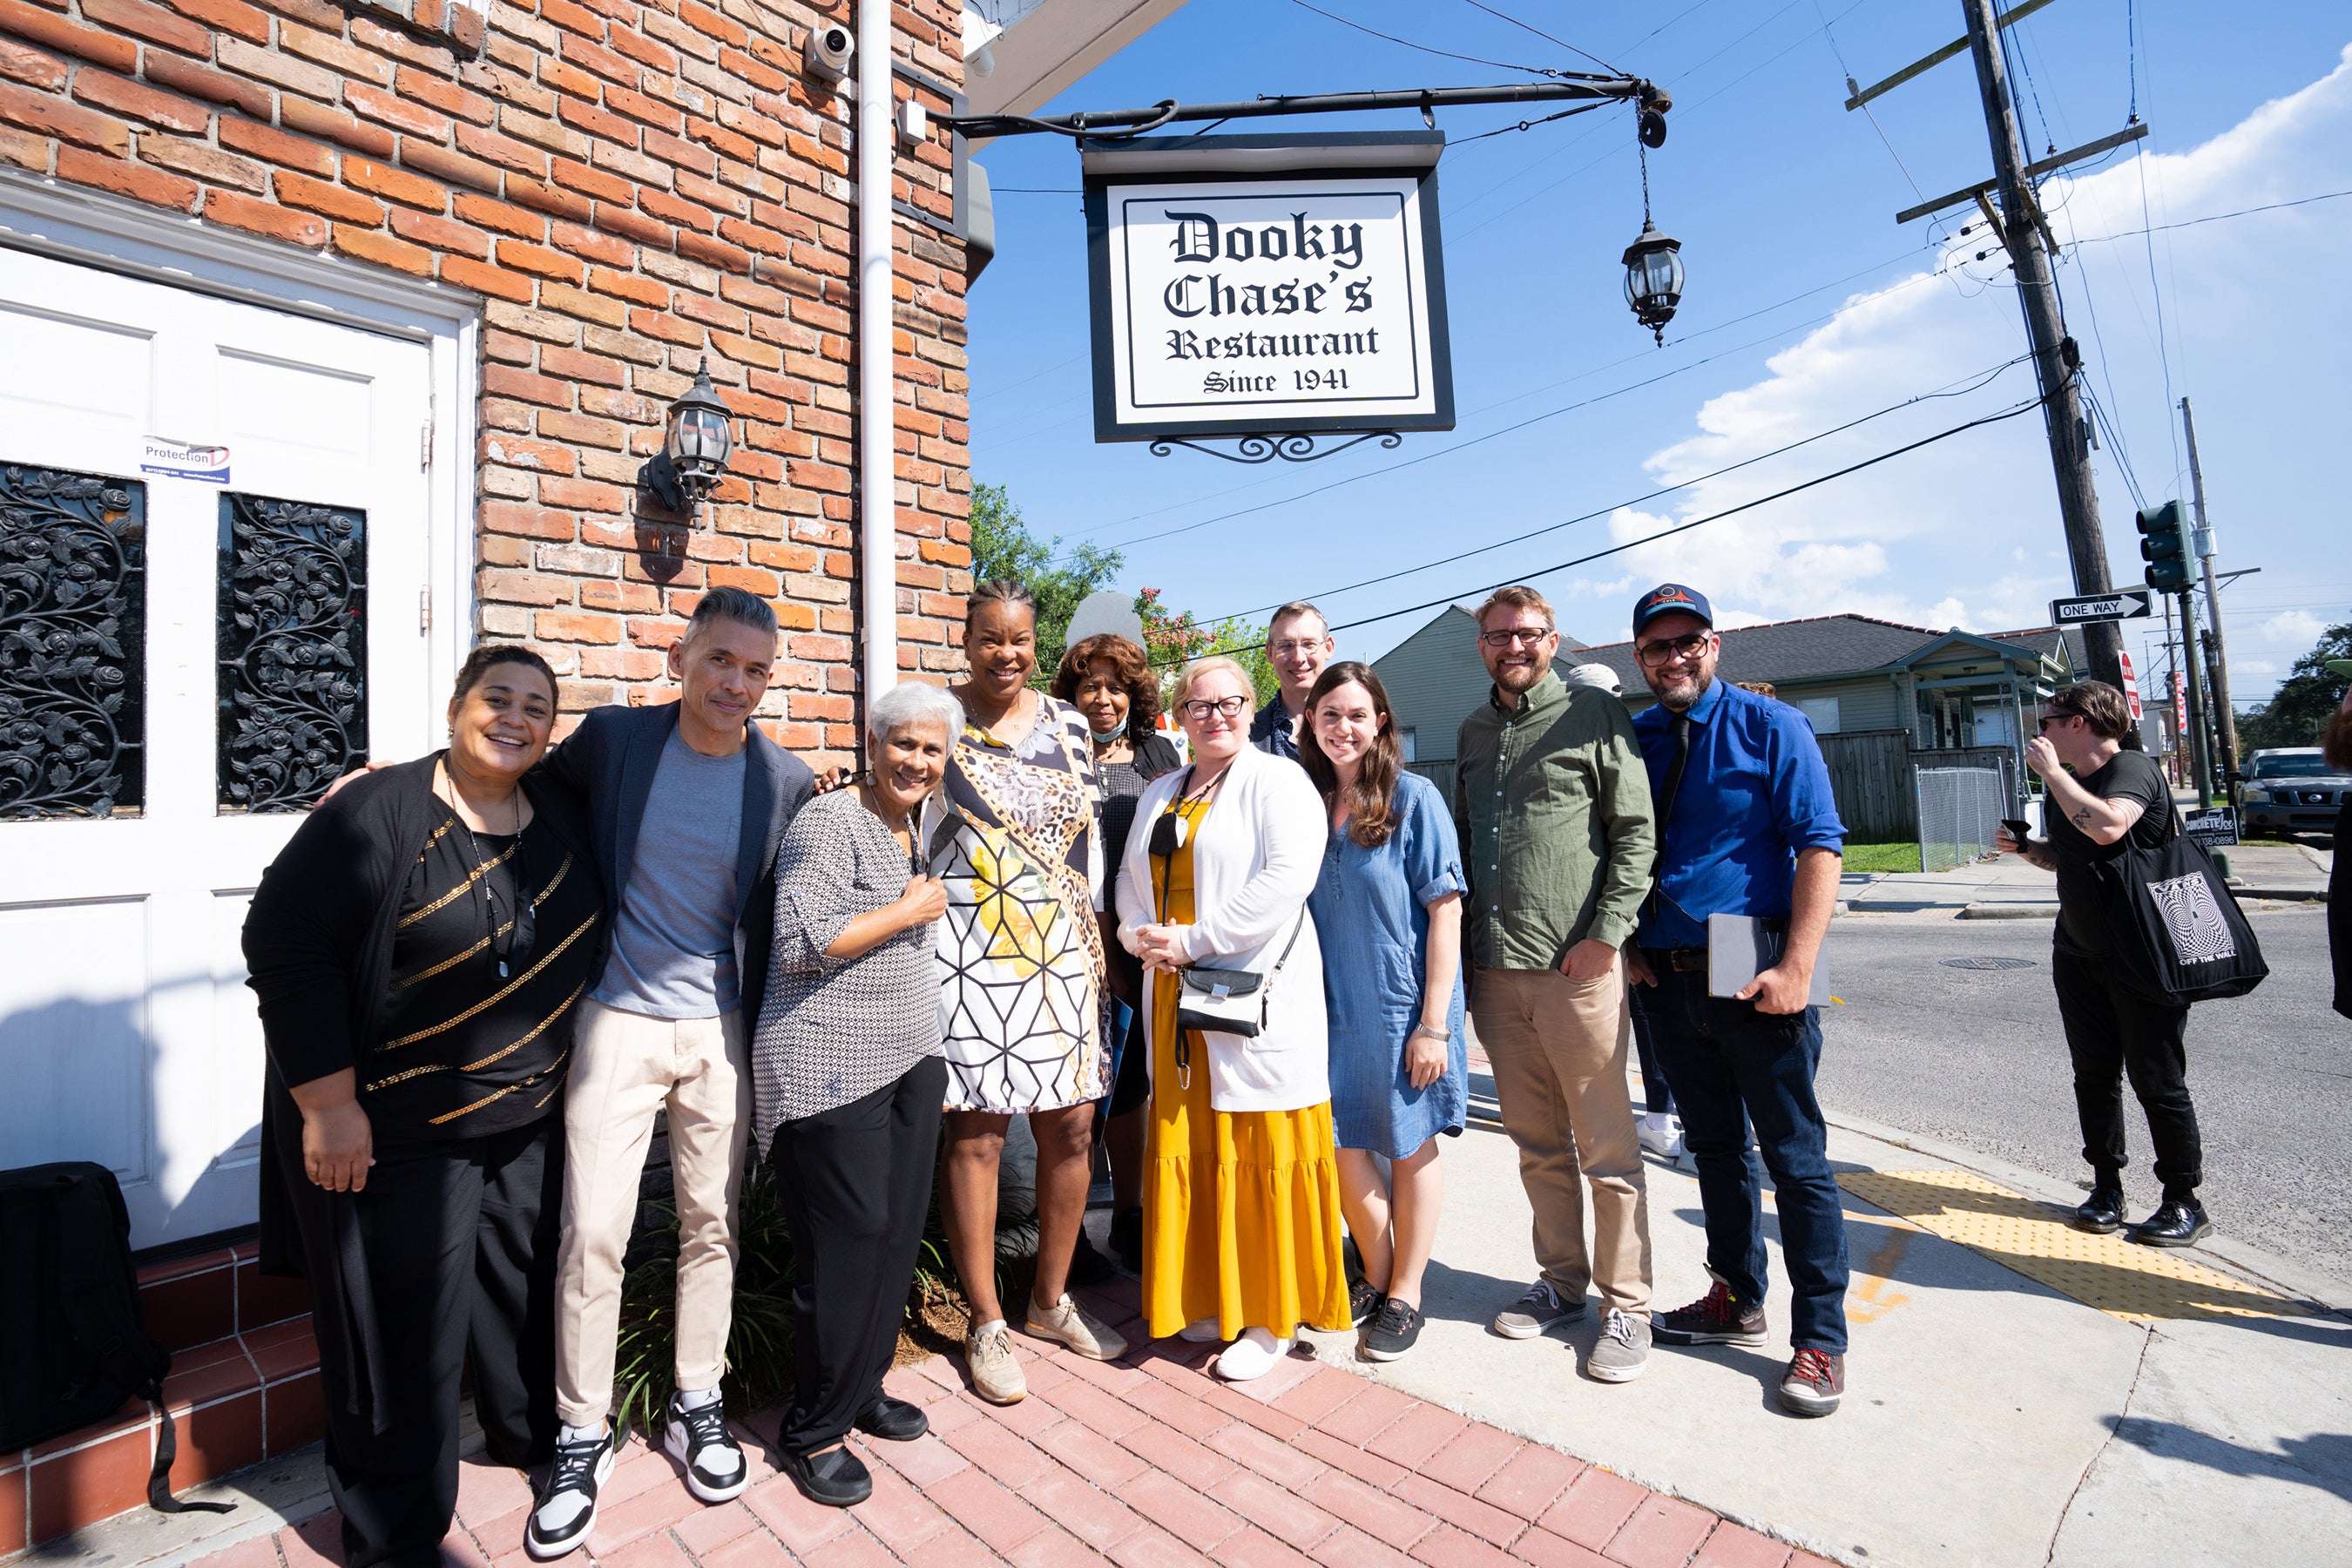        Walt Disney Imagineers met the team at the historic Dooky Chase's Restaurant during their research in New Orleans for Tiana's Bayou Adventure.     (Image: Disney Parks)